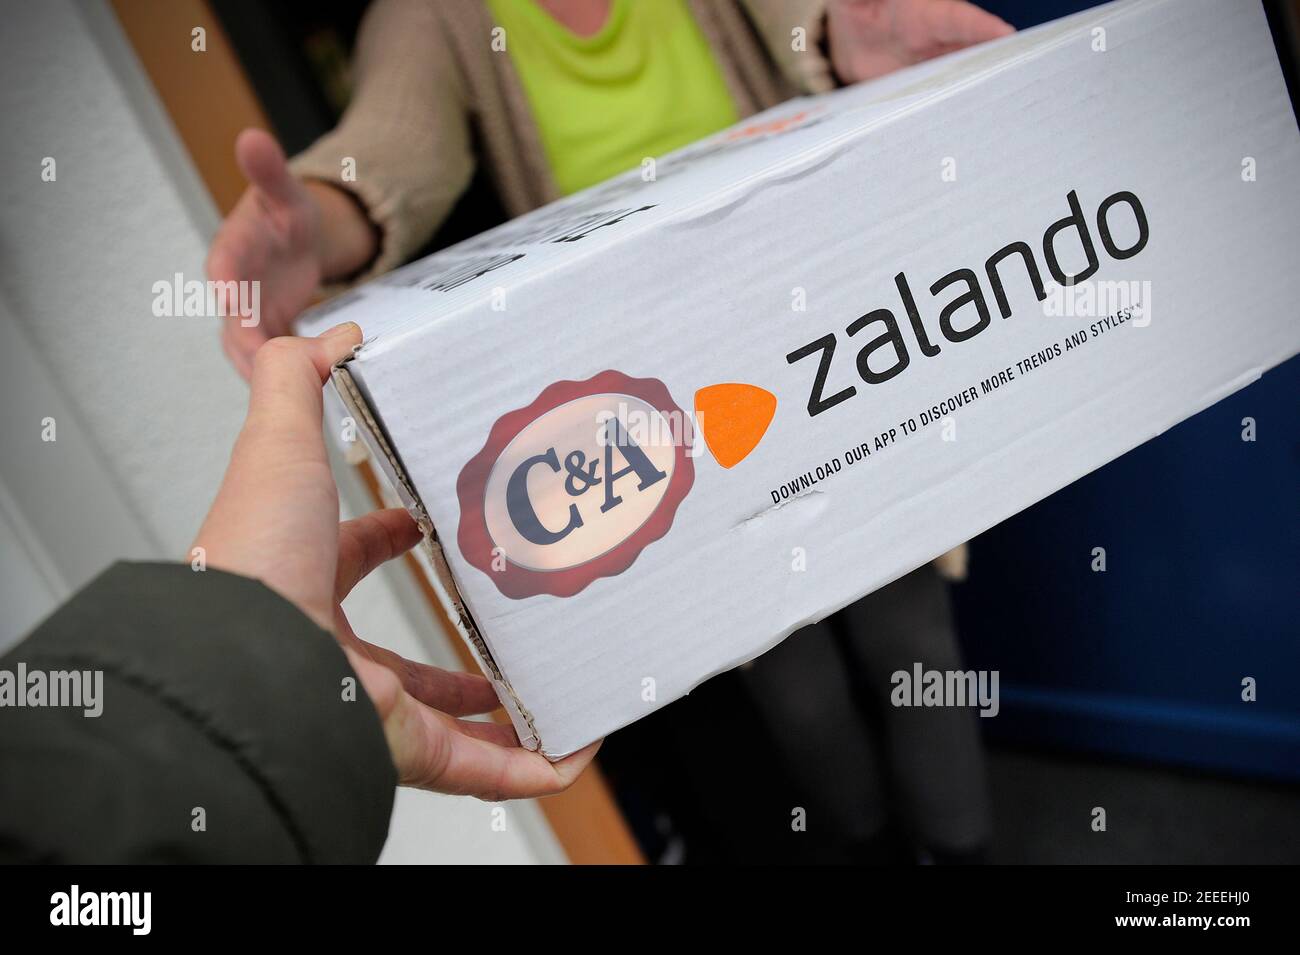 Munich, Deutschland. 16th Feb, 2021. PHOTOMONTAGE: Retail under pressure  Fashion chain C&A is now also selling at Zalando. Zalando parcel is  received, online mail order company for shoes and fashion. | usage